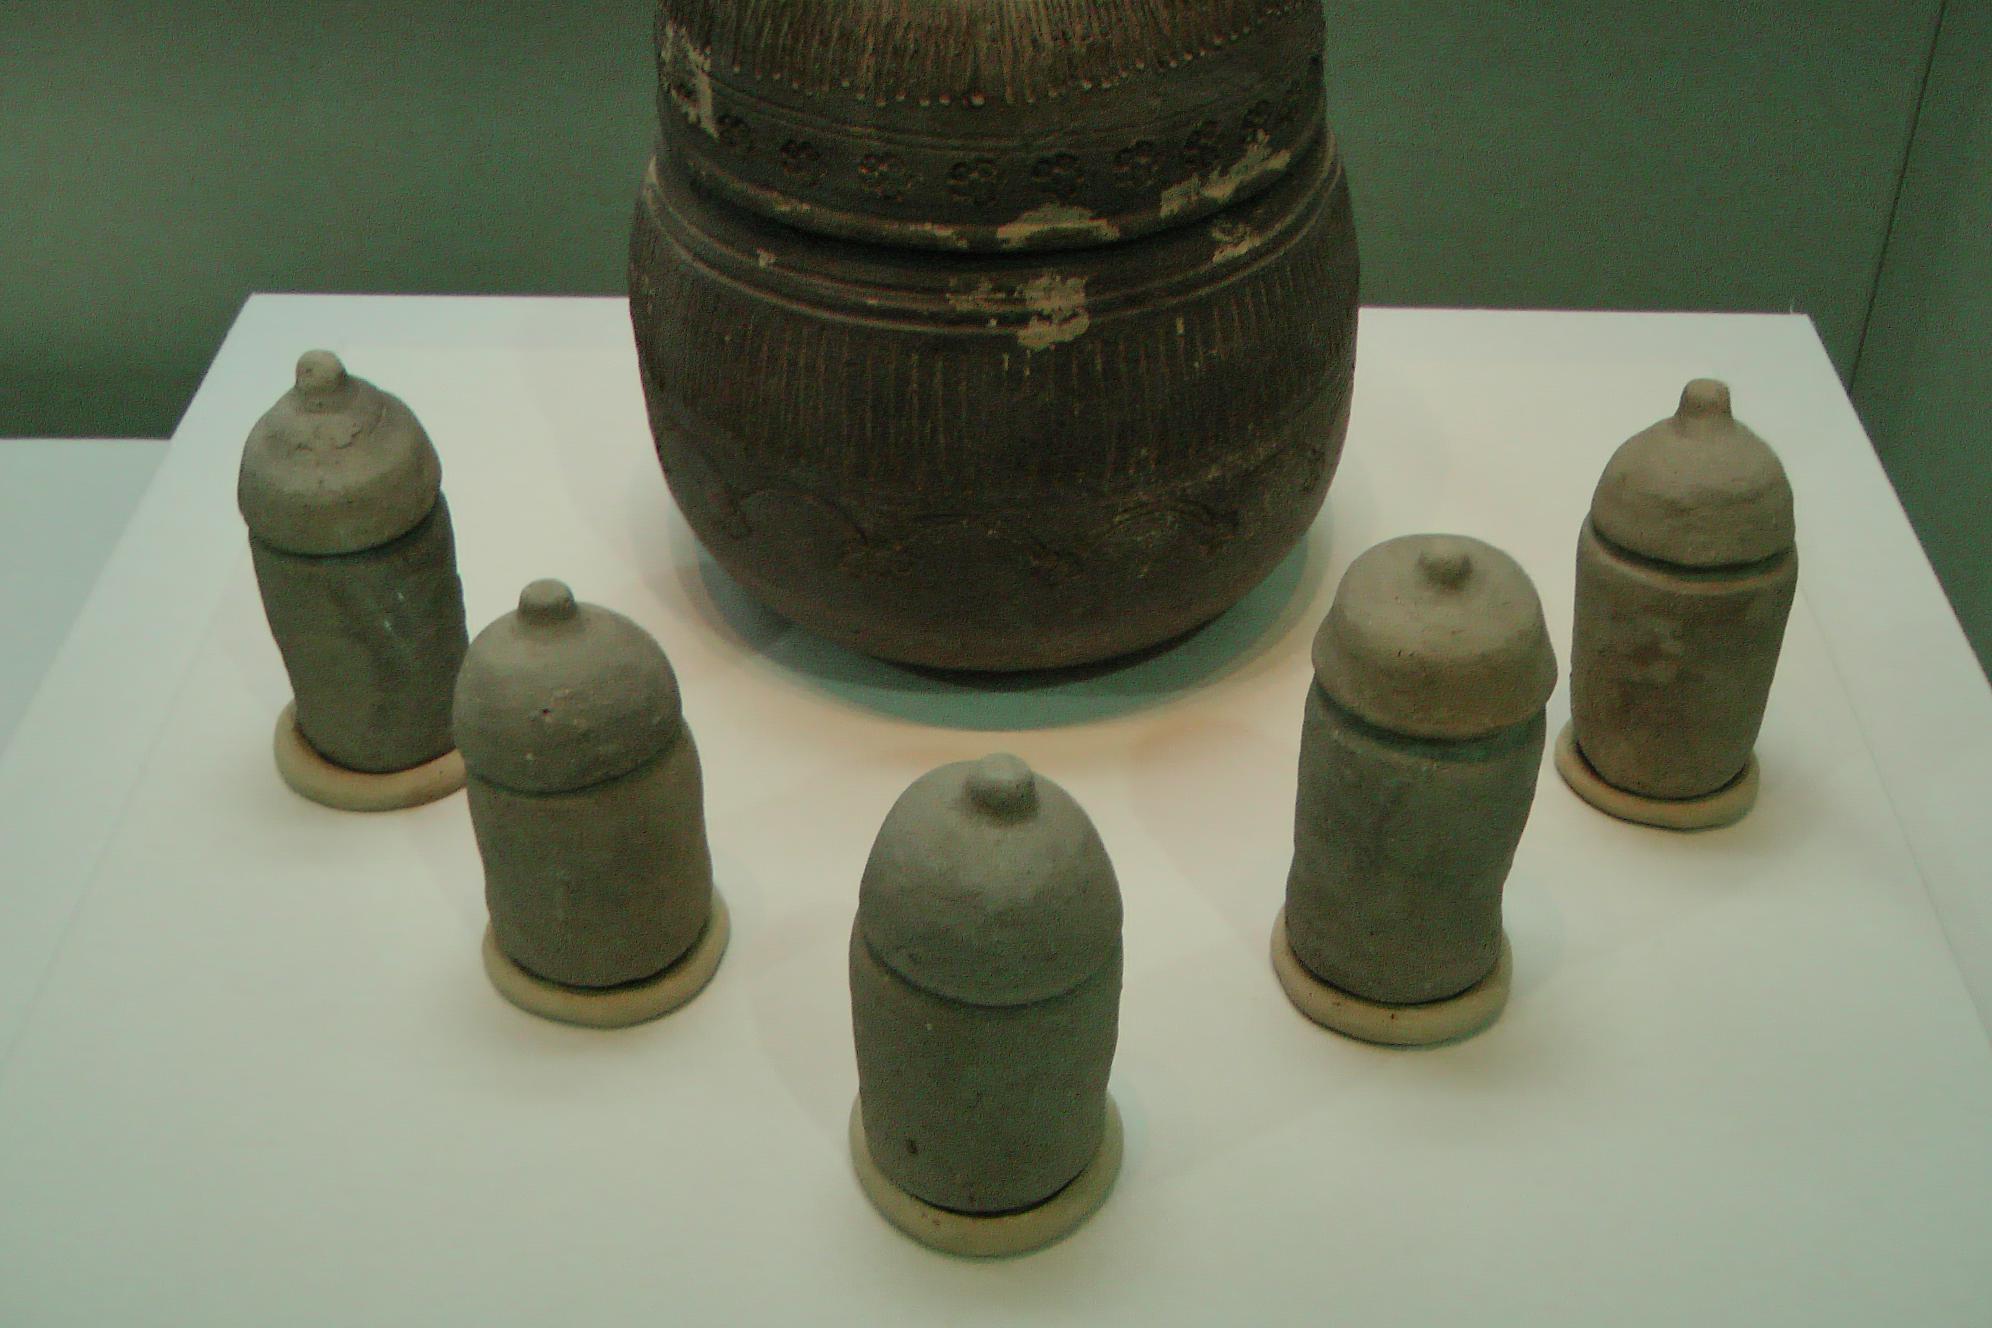 No, it's not part of the sex museum. These are urns